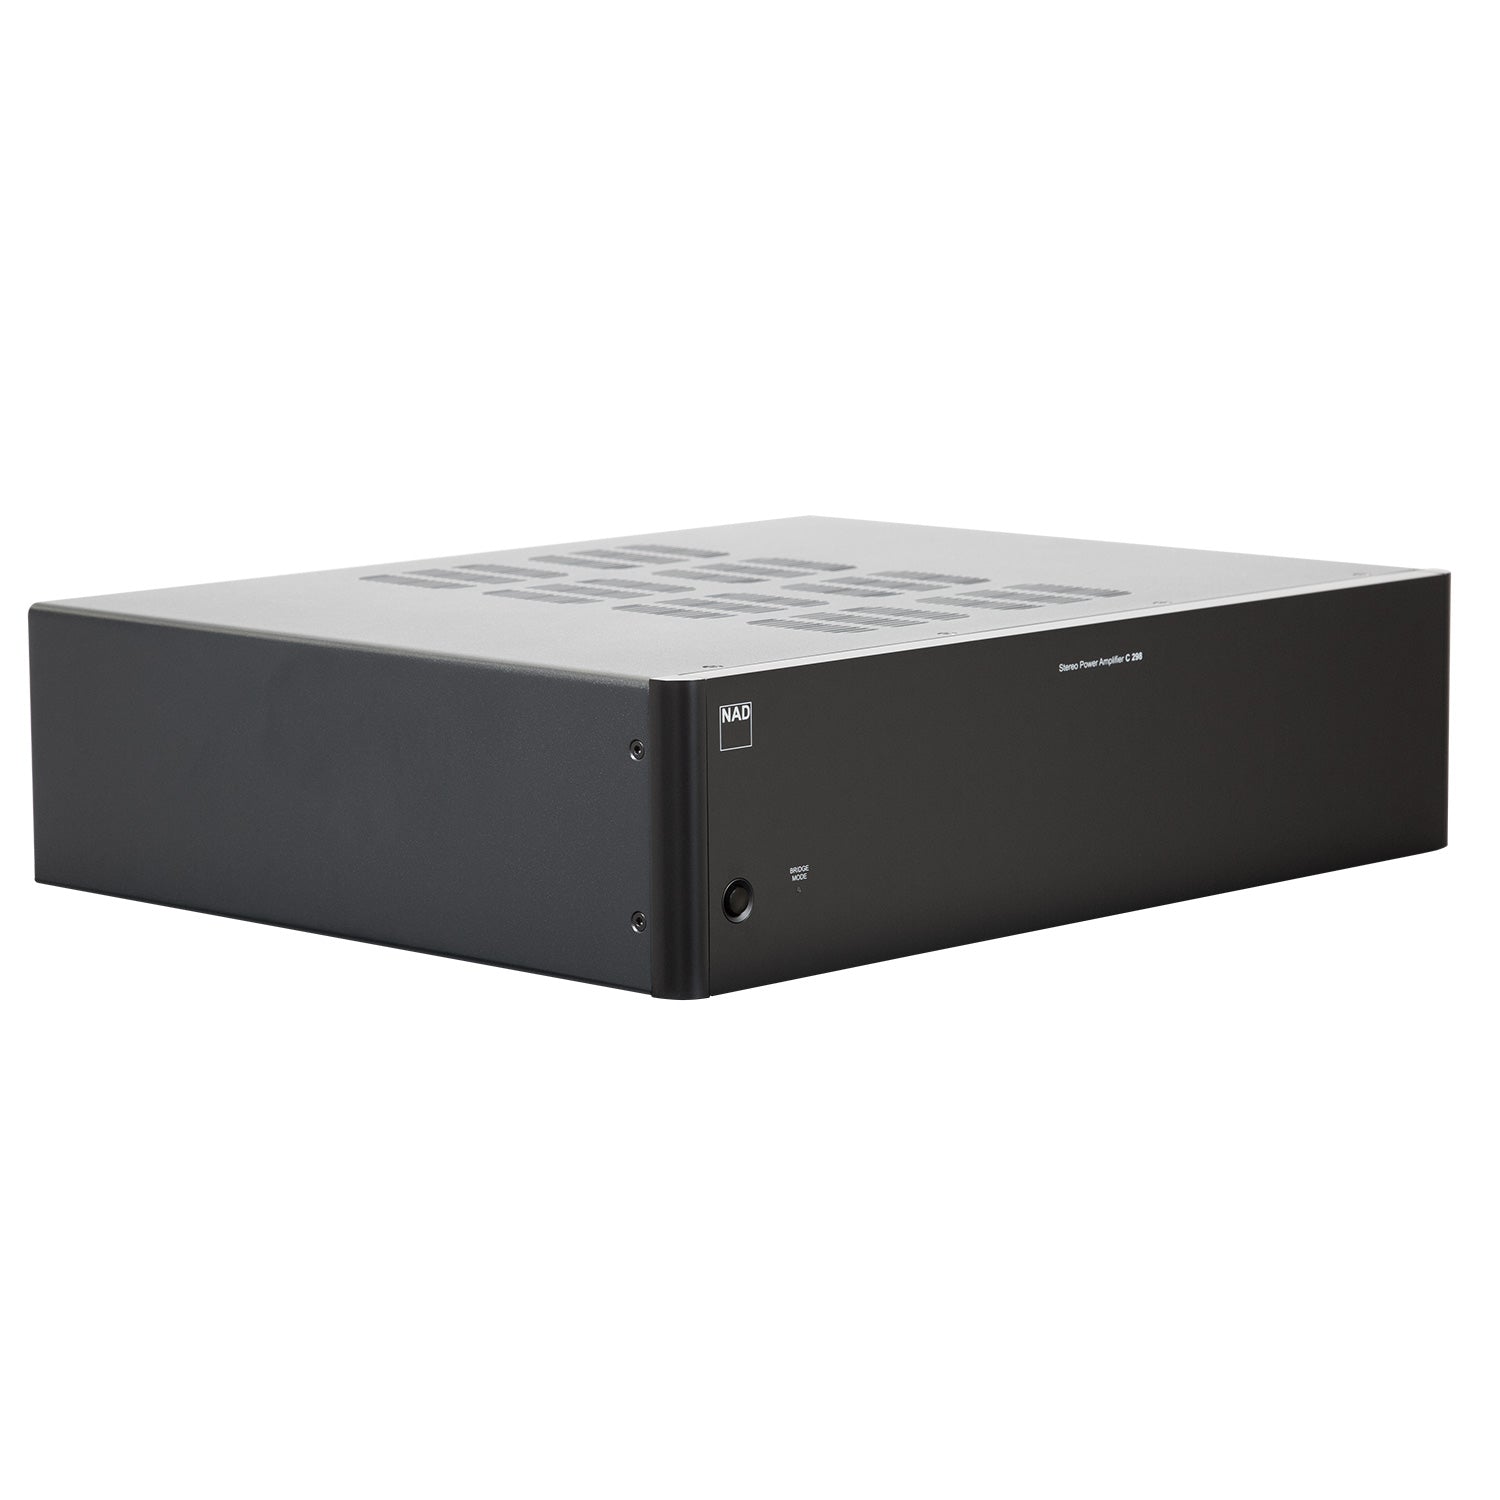 NAD C 298 STEREO POWER AMPLIFIER - Best price on all NAD Electronics High Performance Hi-Fi and Home Theatre at Vinyl Sound, music and hi-fi apps including AV receivers, Music Streamers, Amplifiers models C 399 - C 700 - M10 V2 - C 316BEE V2 - C 368 - D 3045..., NAD Electronics Audio/Video components for Home Theatre products, Integrated Amplifiers C 700 NEW BluOS Streaming Amplifiers, NAD Electronics Masters Series…